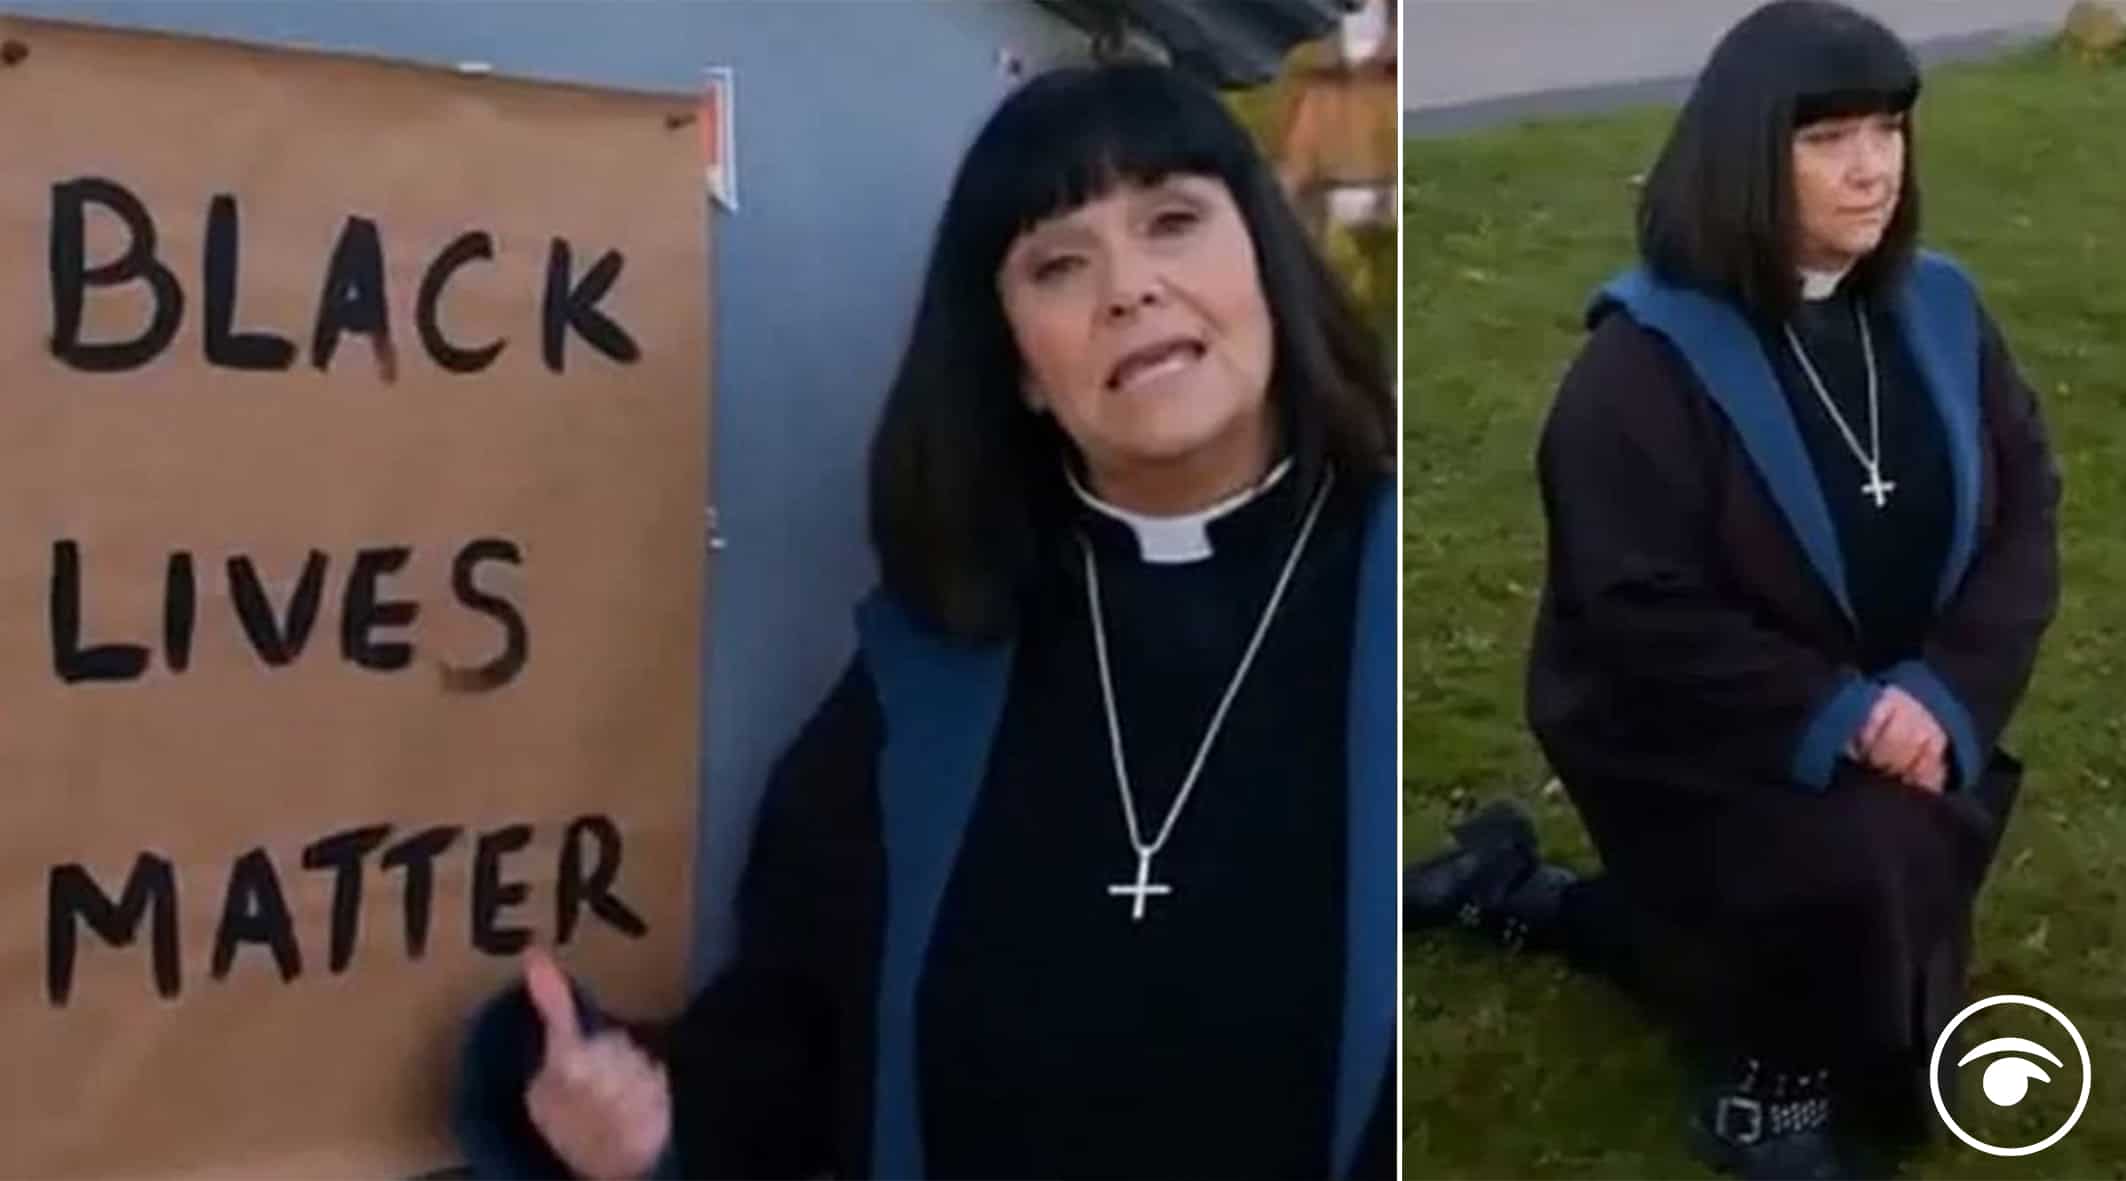 Vicar of Dibley viewers rage at being ‘lectured at’ after BLM scene